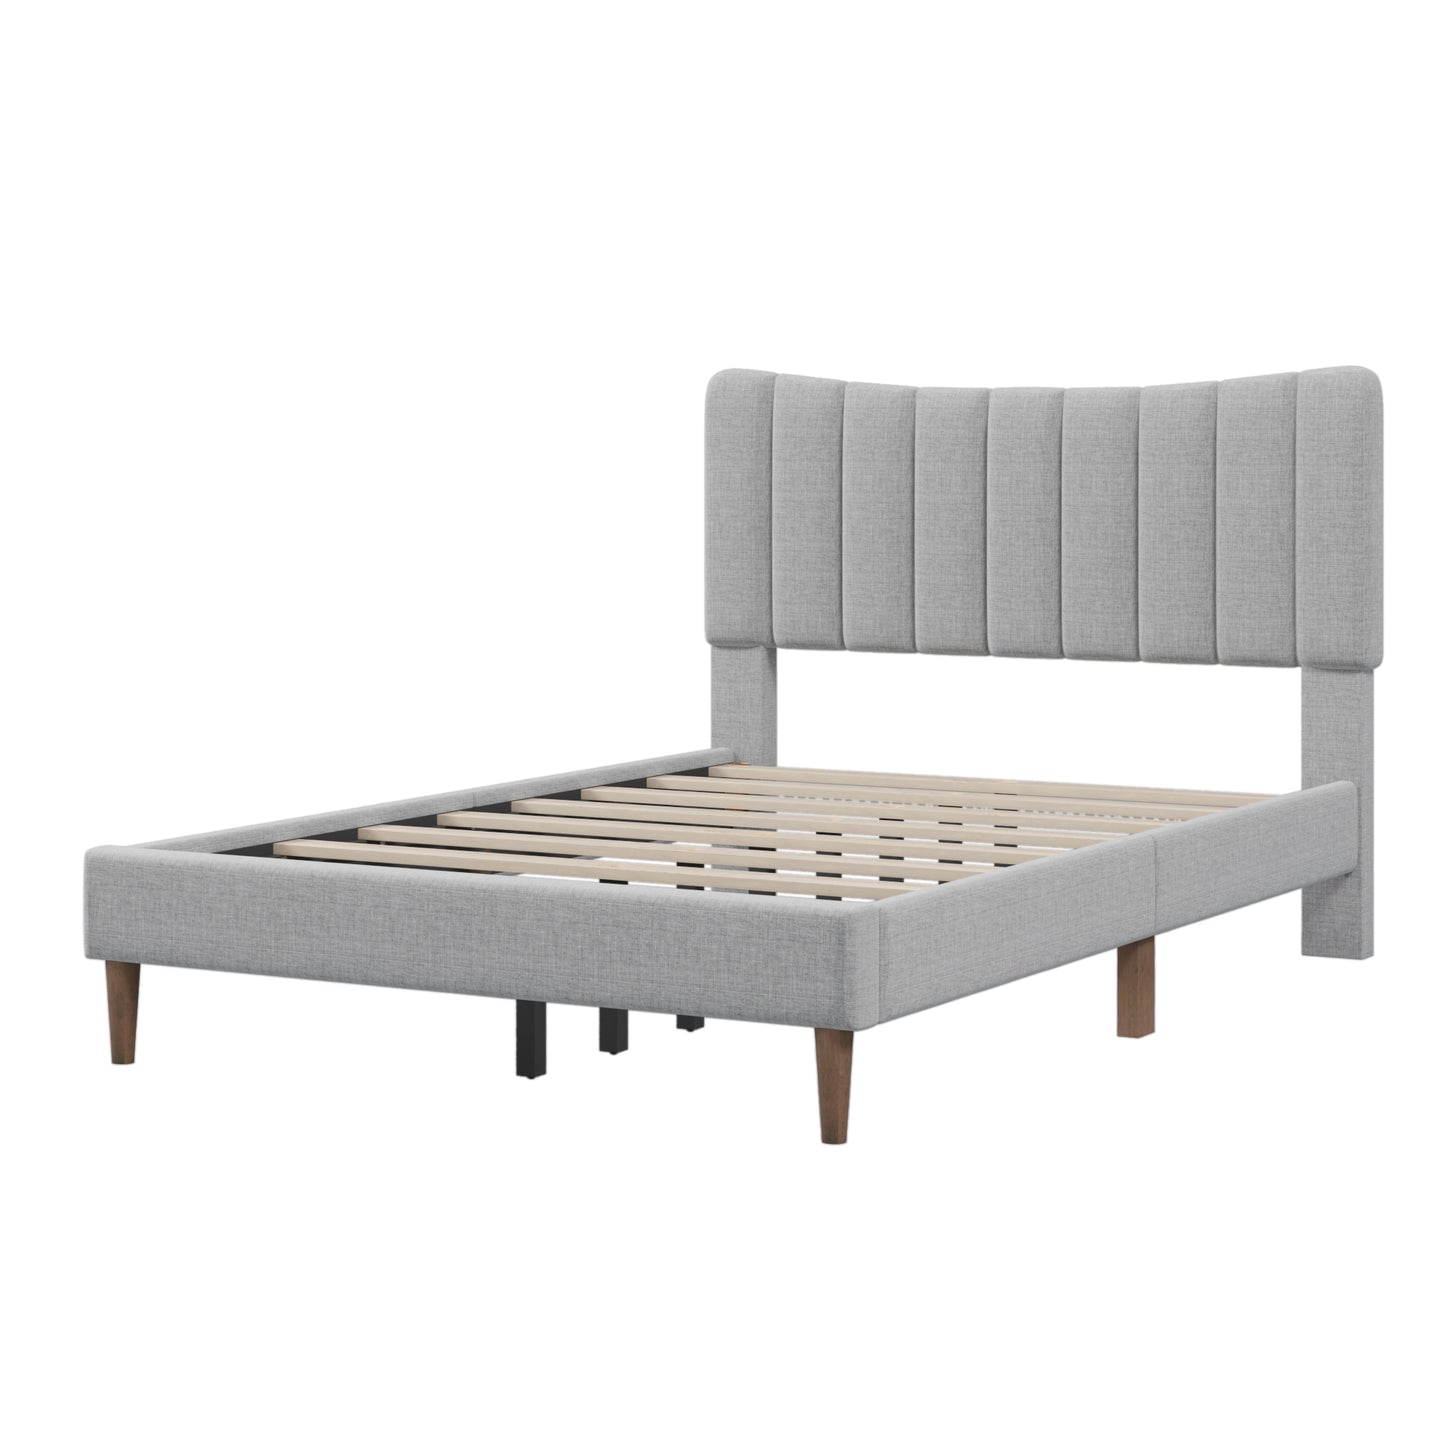 Upholstered Platform Bed Frame with Vertical Channel Tufted Headboard, No Box Spring Needed, Full,Gray